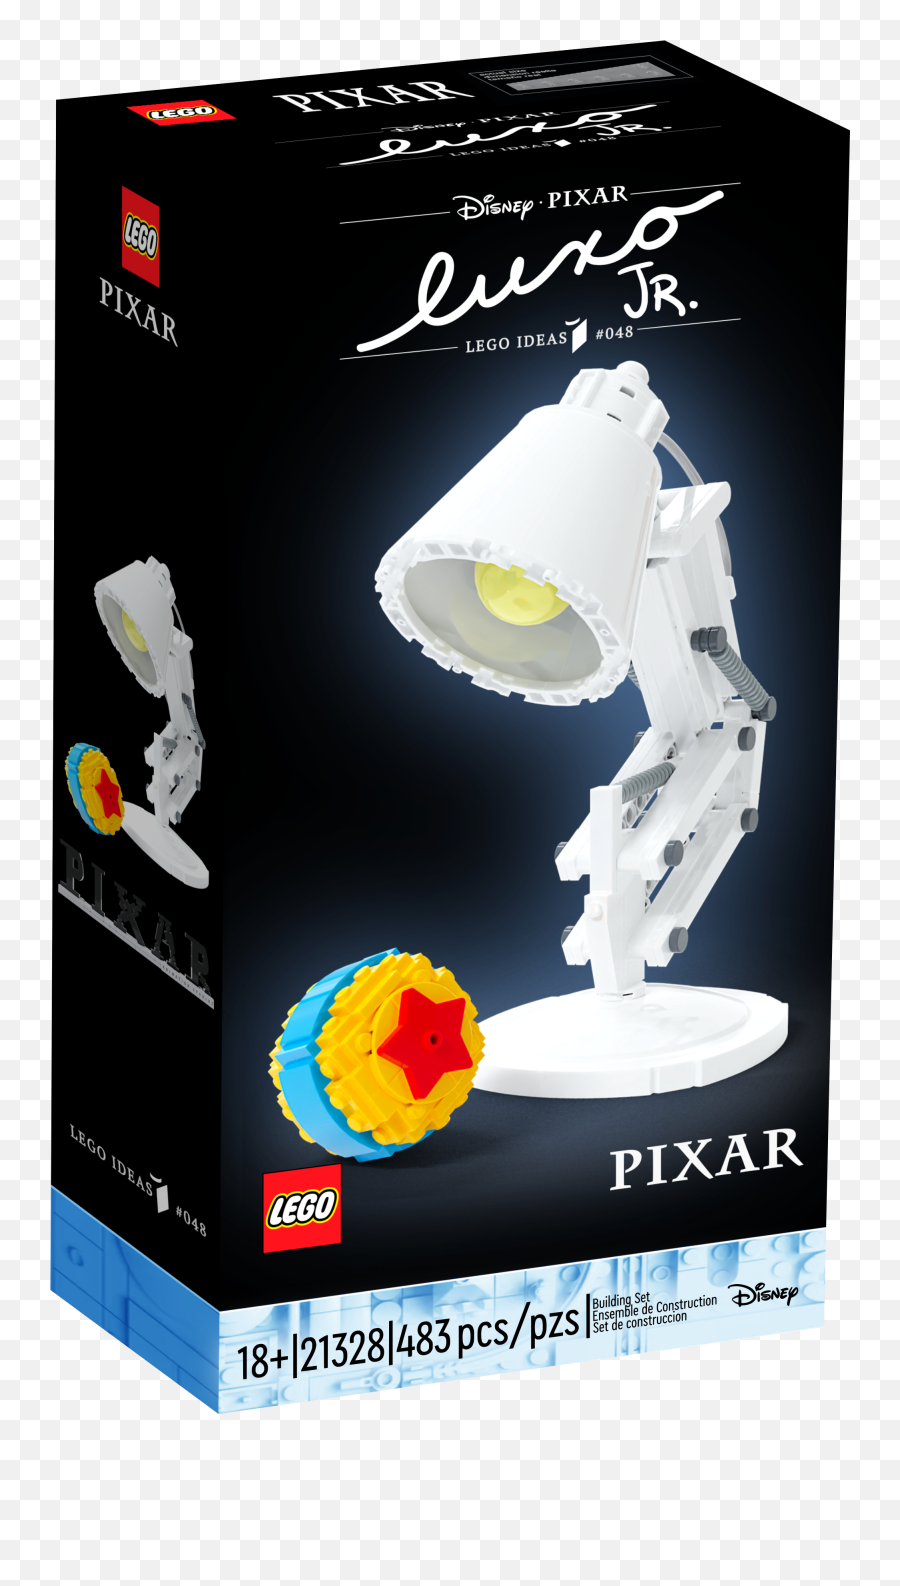 Official Rpixar Movie Ranking Thread - December 2020 Pixar Custom Luca Lego Sets Emoji,What Movie Was Made About Emotions That Left Sadness Out